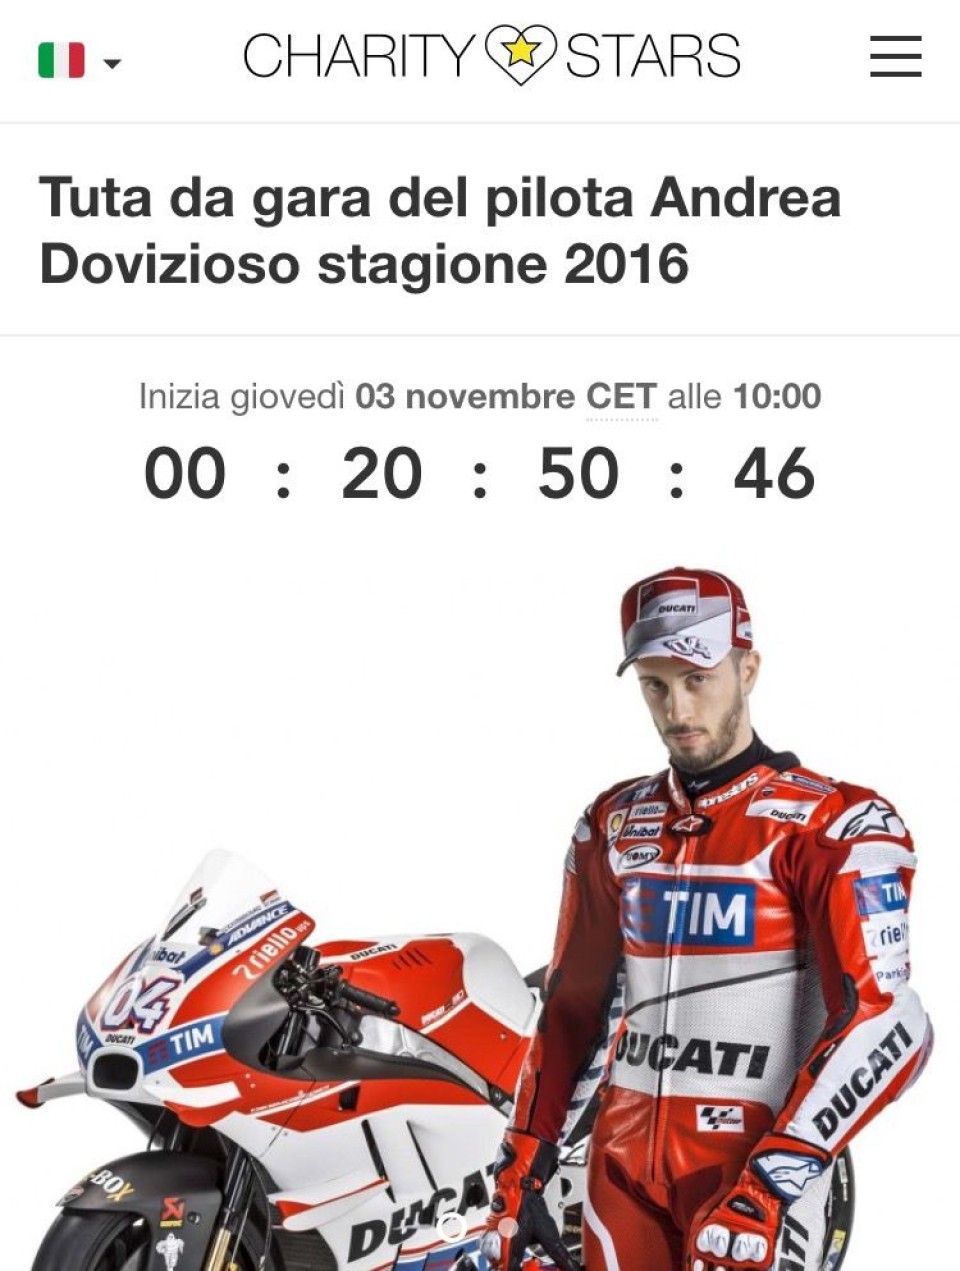 Dovizioso to auction his leathers for Amatrice